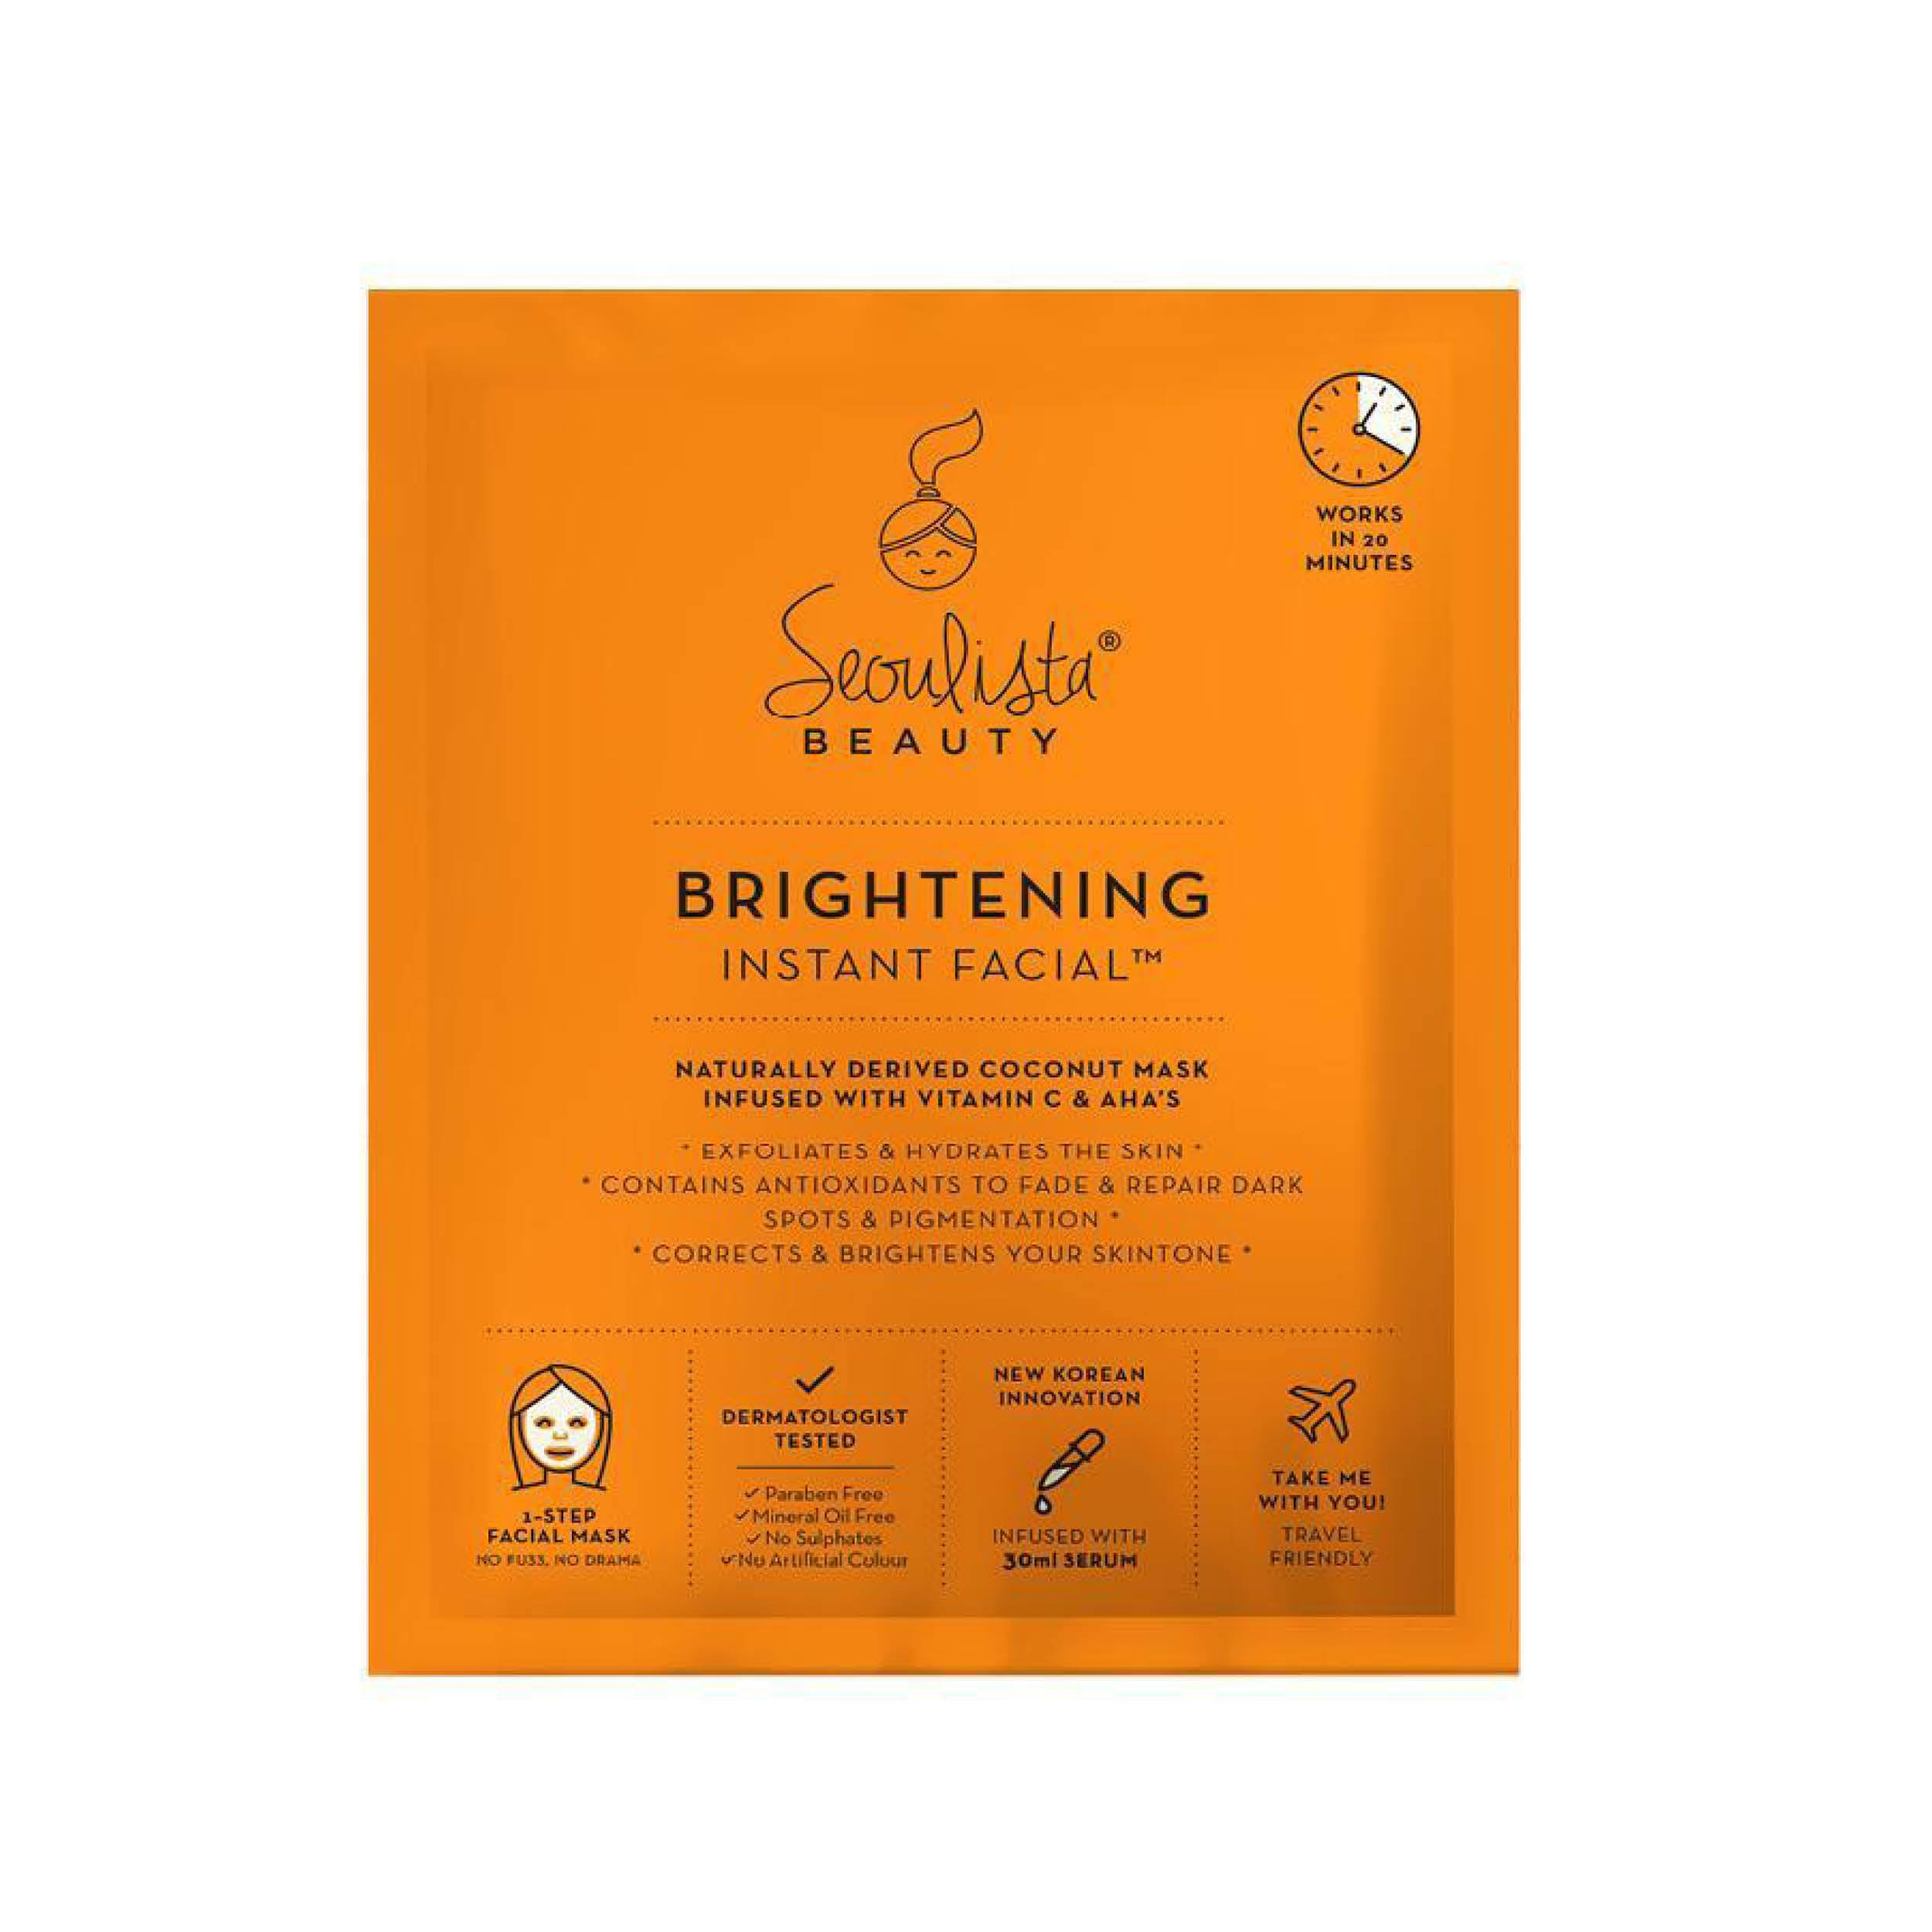 Seoulista Beauty Brightening Instant Facial Mask